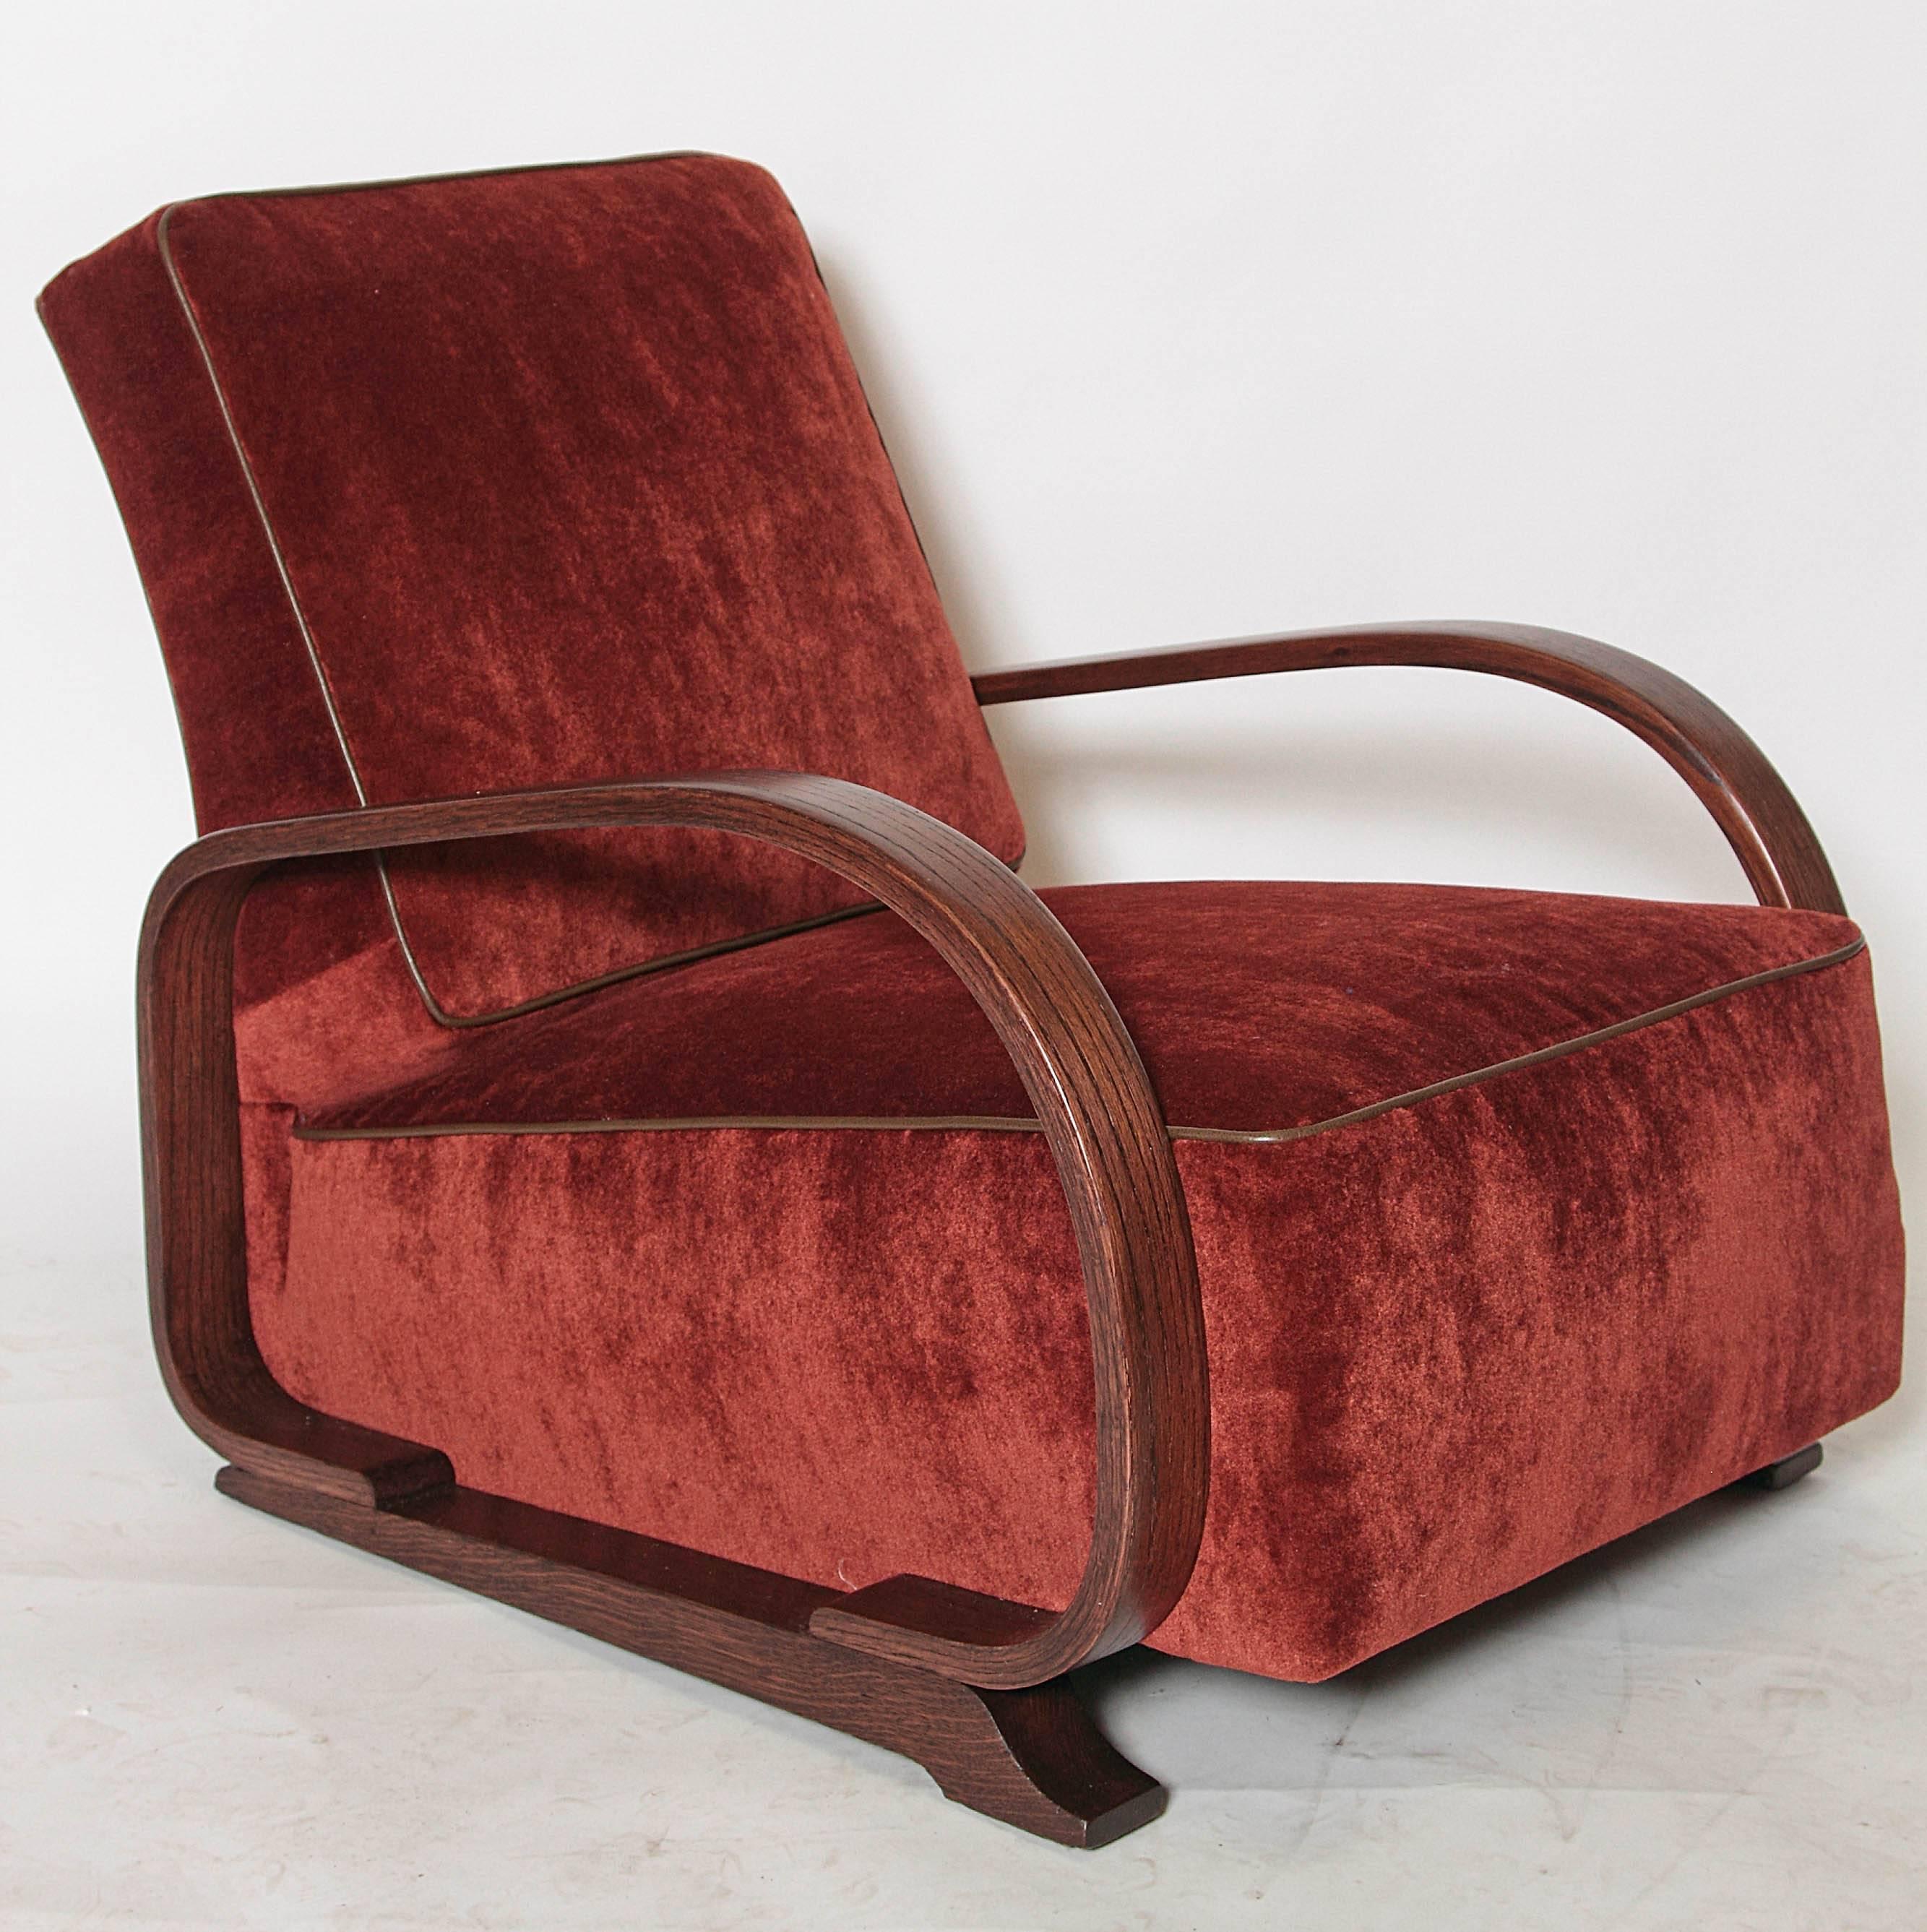 One of Gilbert Rohde's best Art Deco designs for Heywood-Wakefield.
Early example of American streamlining.
Dramatic arched back and canted seat, steam-bentwood frame.
Completely restored, with high-grade mohair and leather piping.
These are